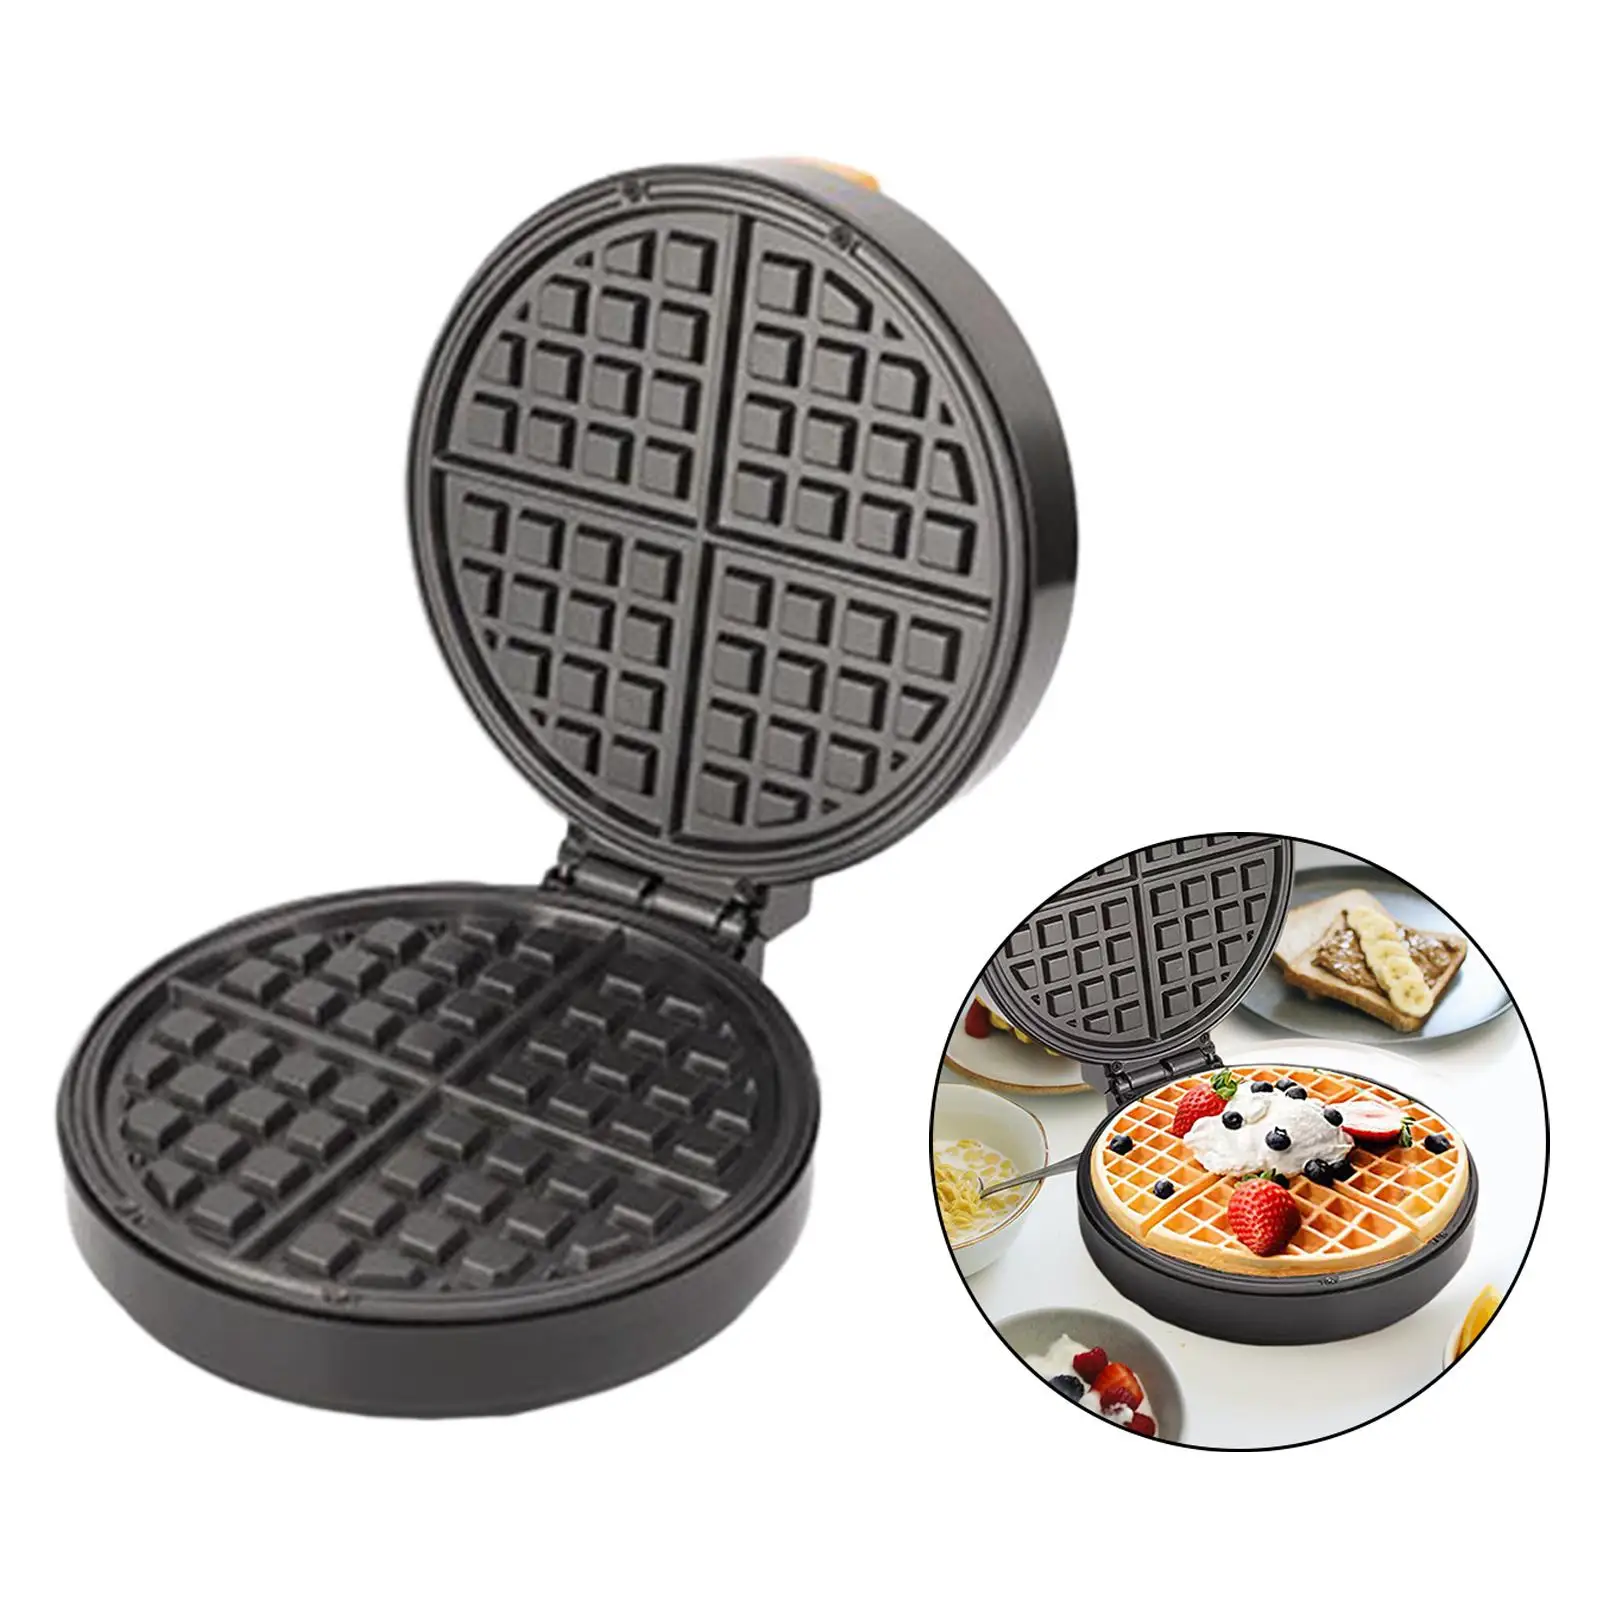 Cooking Plates Multifunctional Anti Scald Handle LED Display US Adapter Portable Waffle Maker for cinnamons Roll Cupcake Oatmeal